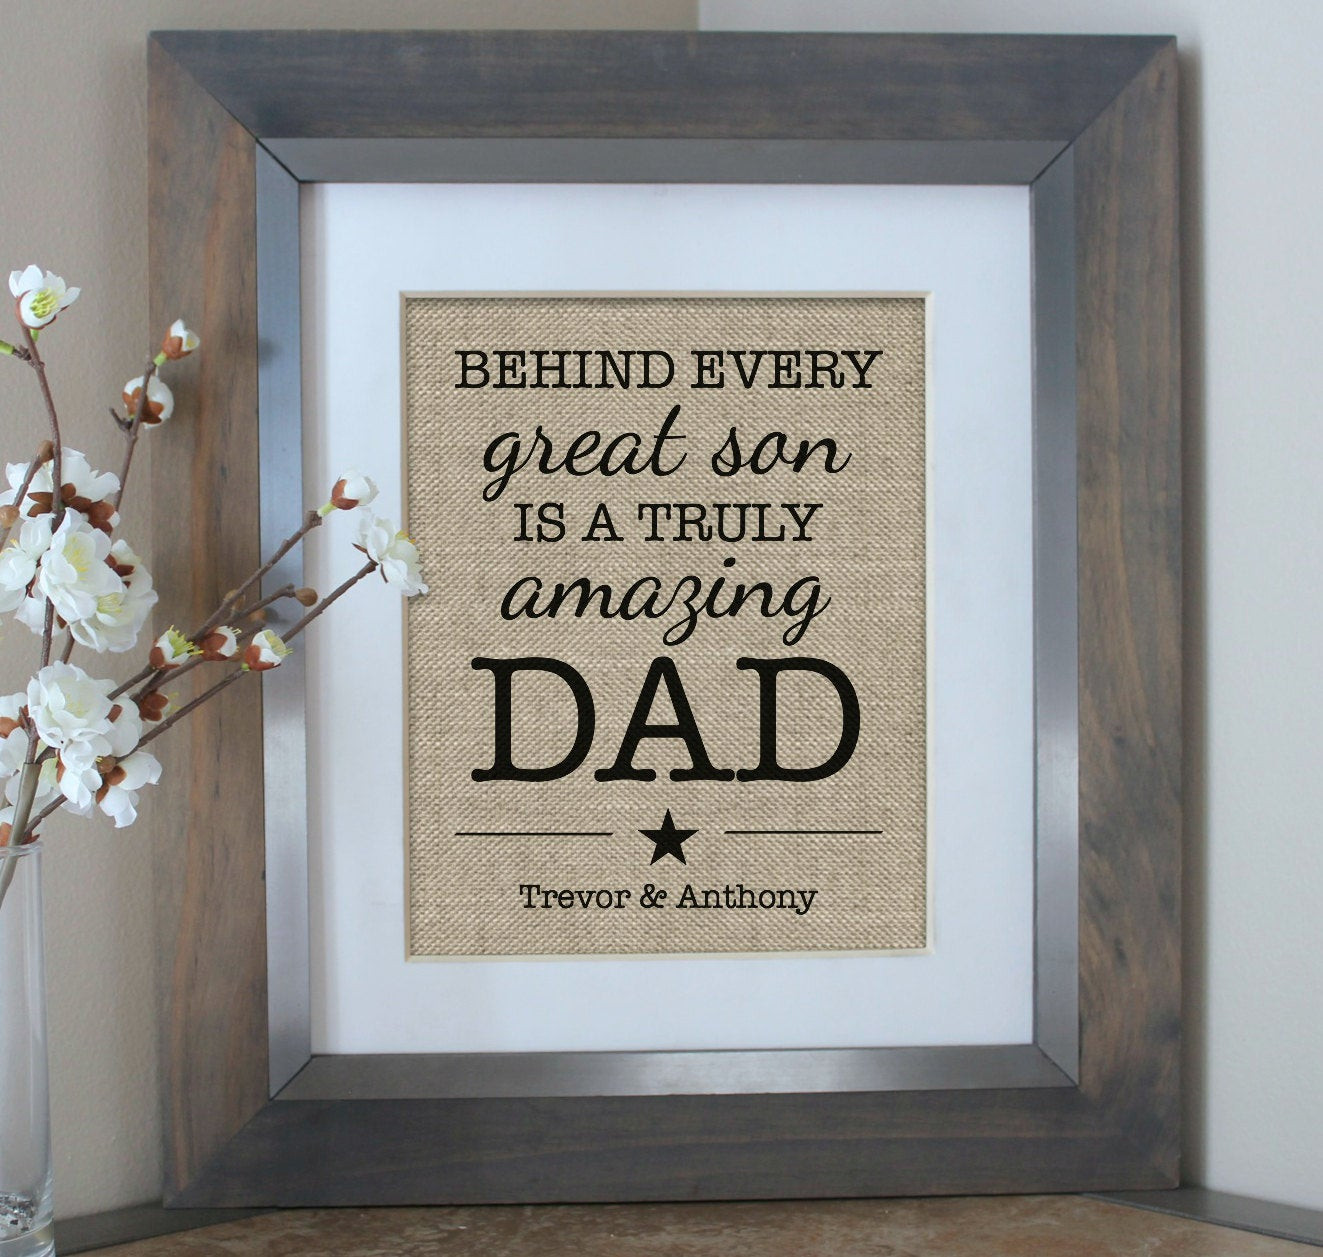 Fathers Day Gifts From Sons
 Father s Day Gift from Son Personalized Gift by EmmaAndTheBean